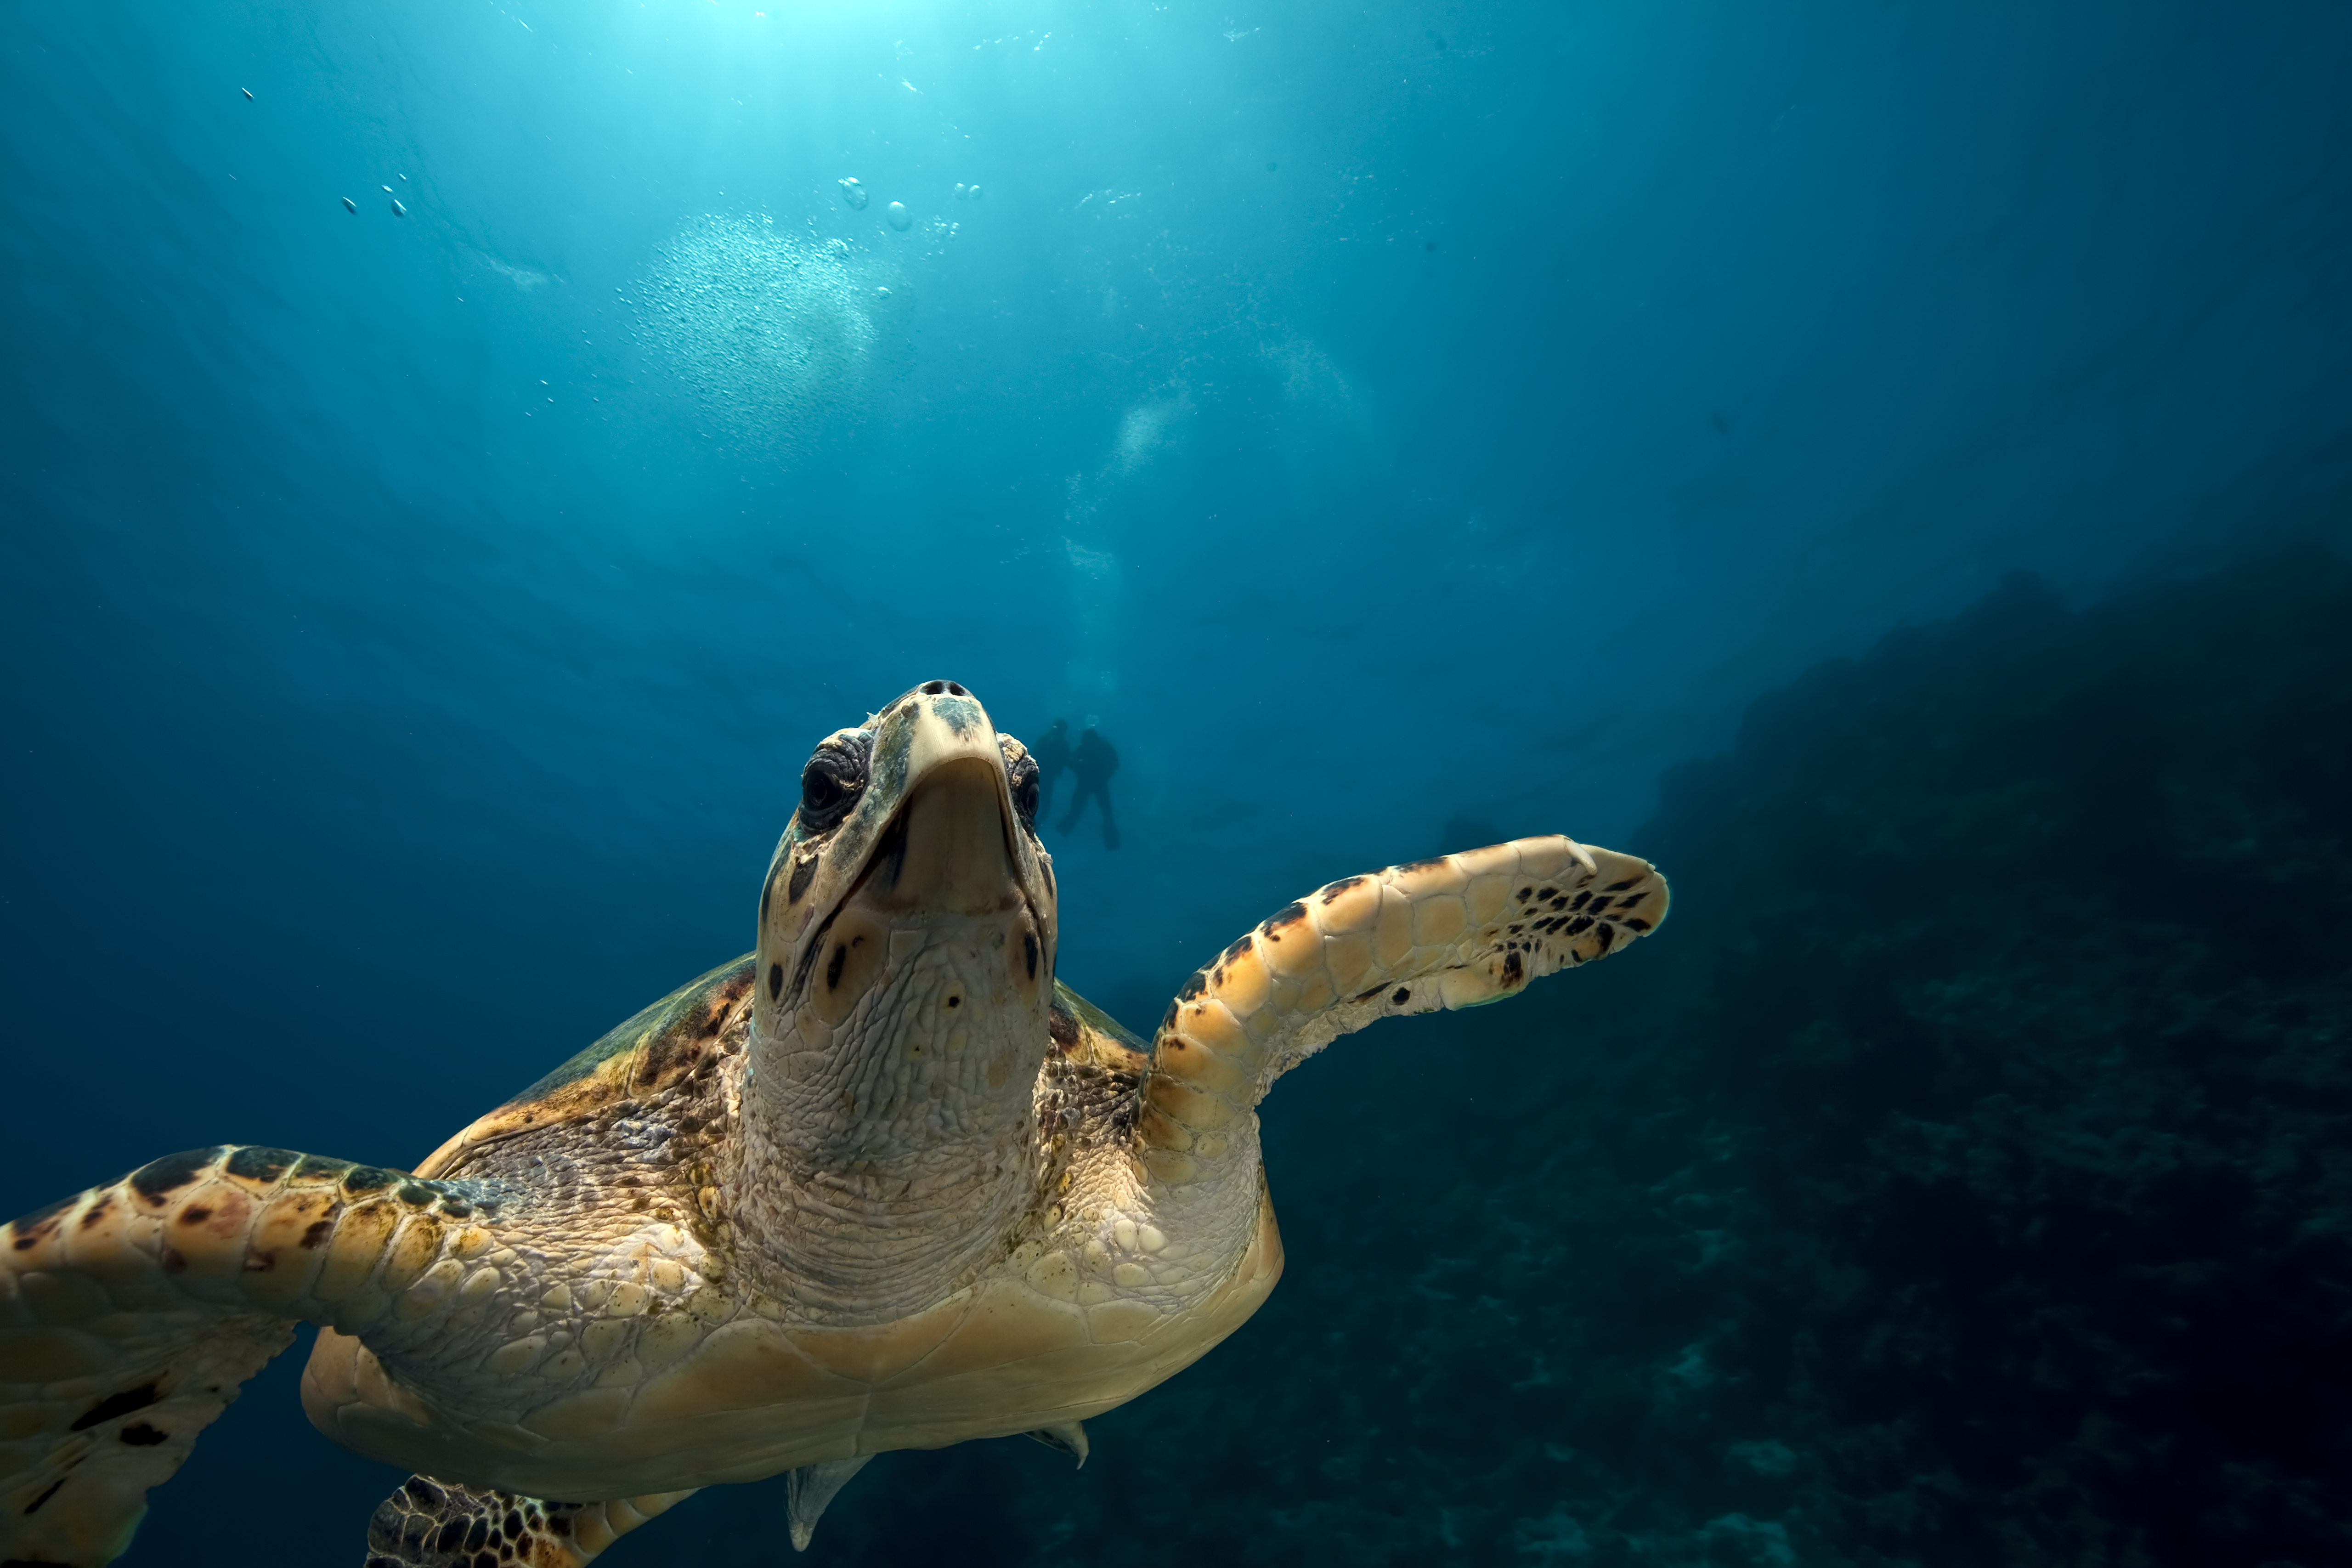 Close up of a turtle found in the waters surrounding the WIT Crane wreck in Saint Thomas, USVI